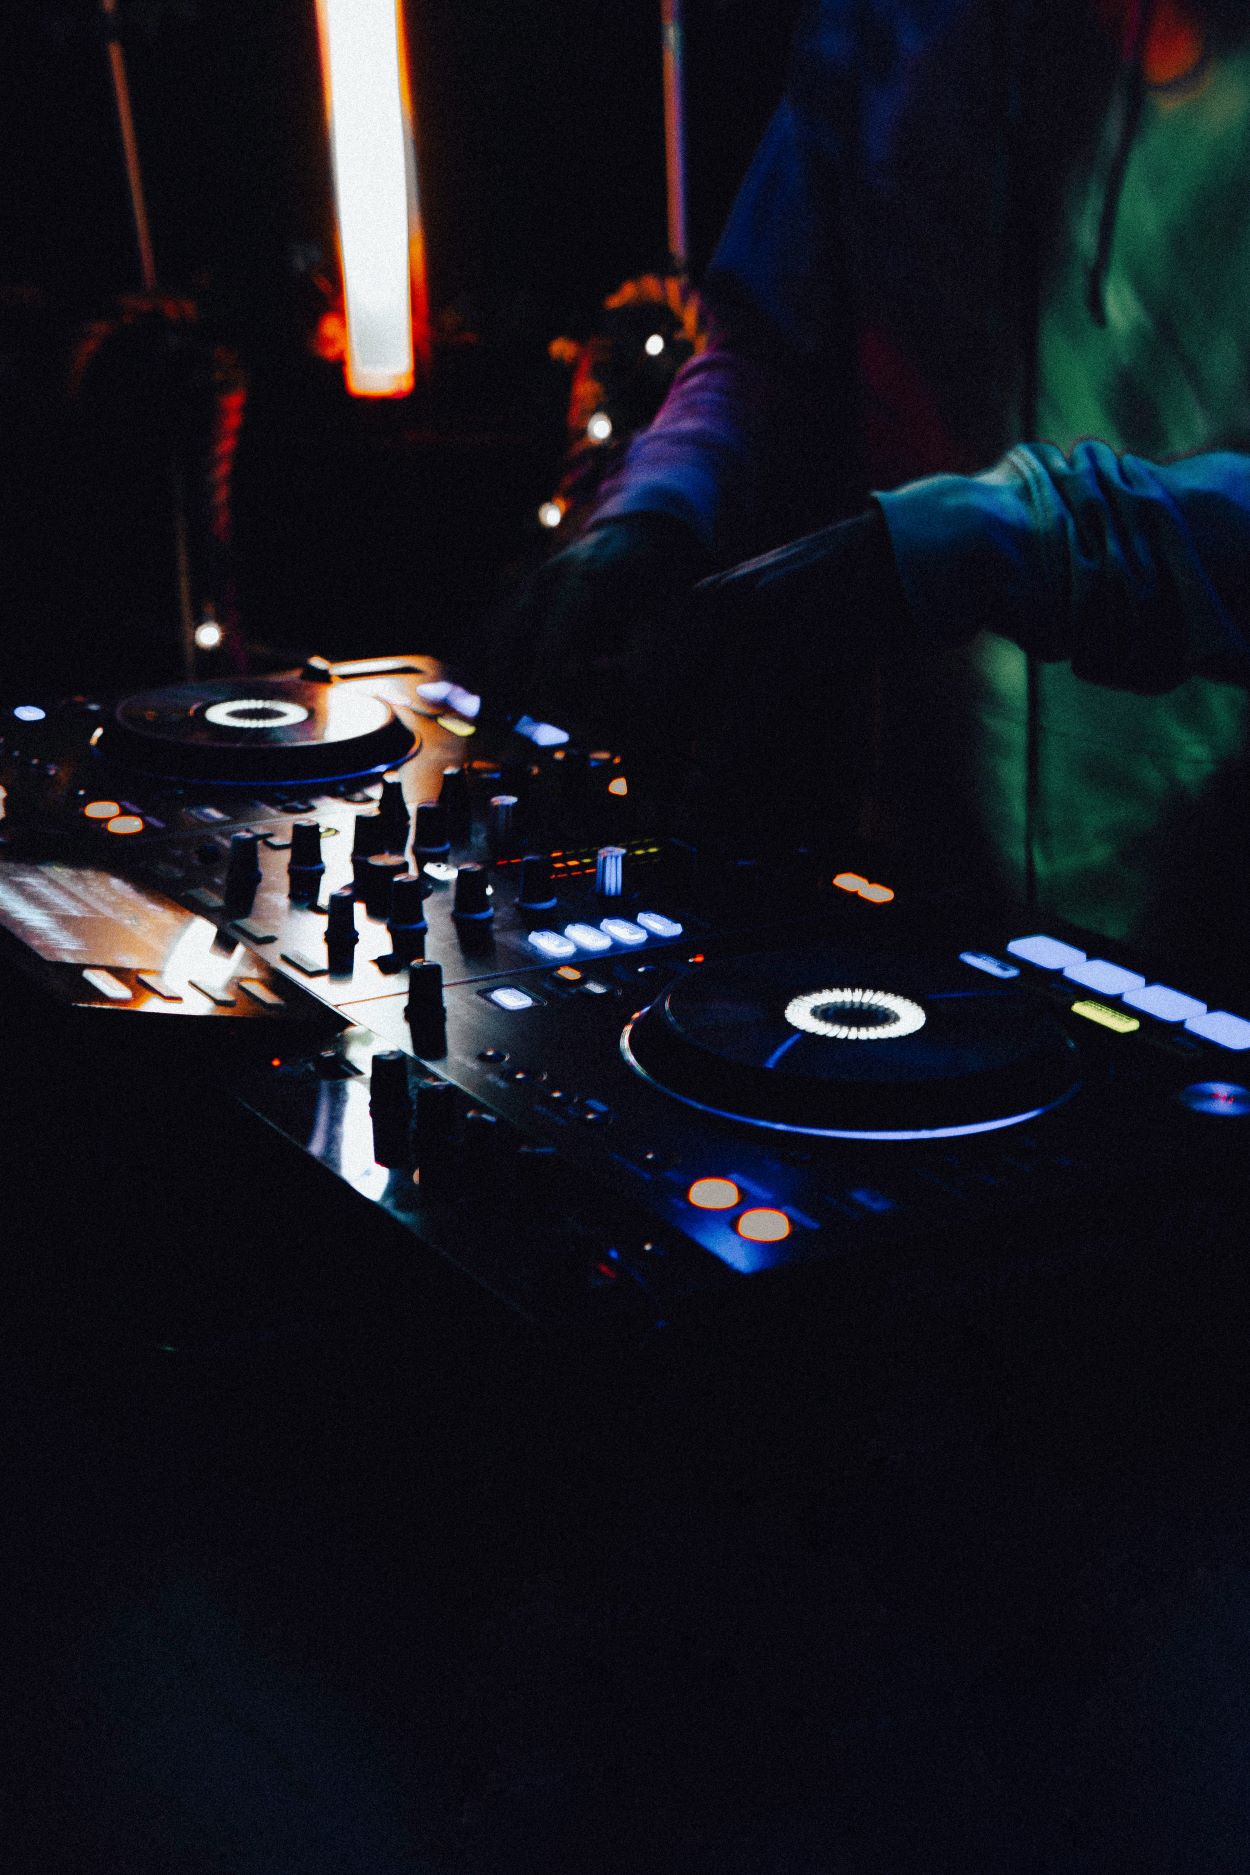 An image of a DJ on their turntables.